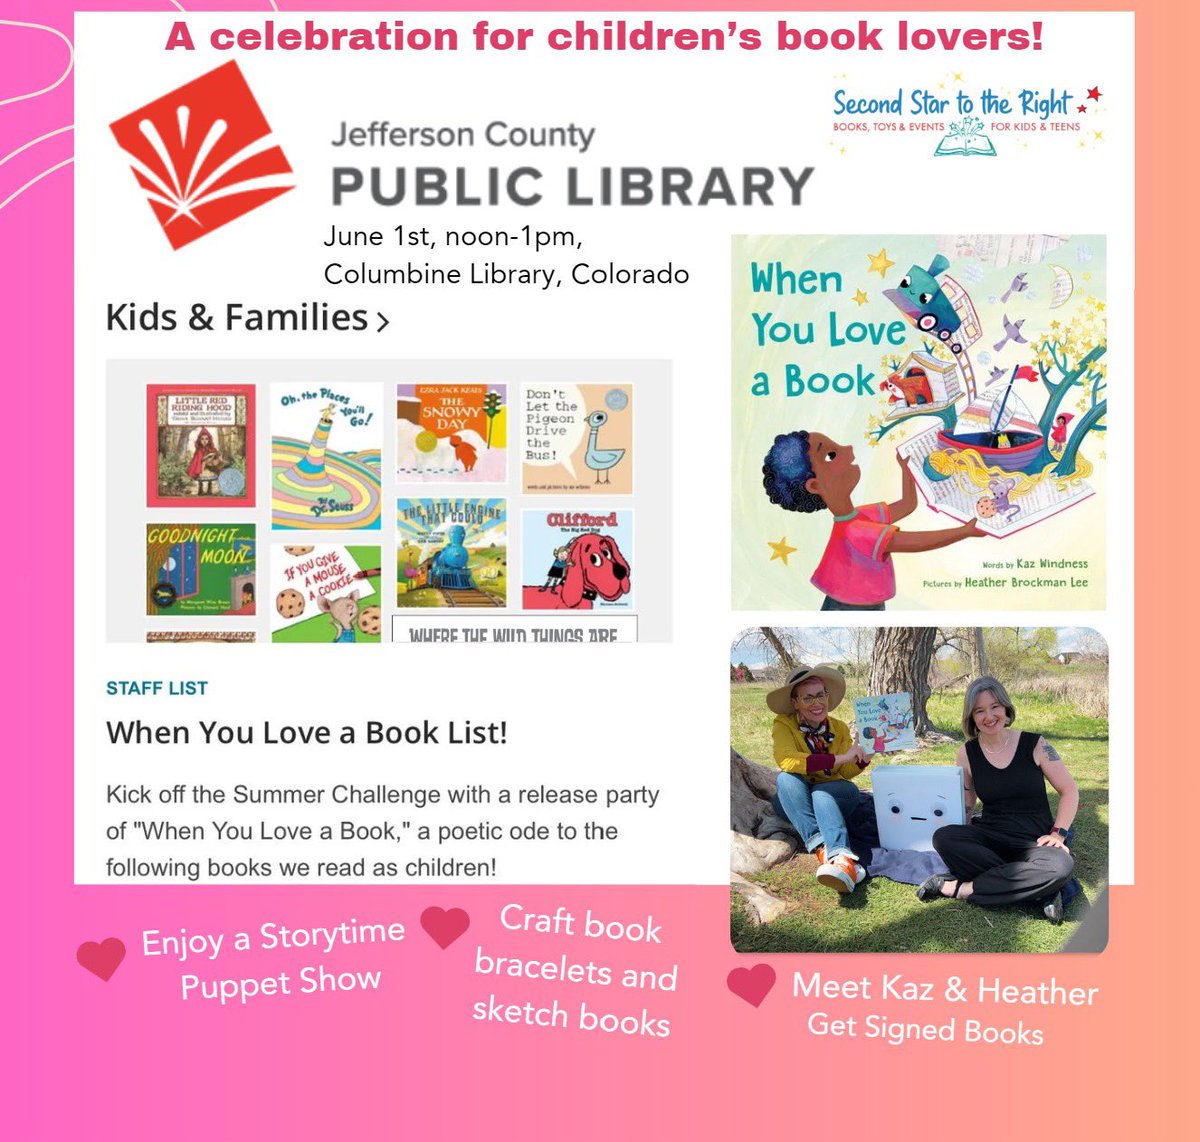 Love classic children’s books? You’ll love WHEN YOU LOVE A BOOK! Request at your local library and join us at Columbine Library on June 1st at noon for a book birthday party hosted by @SecondStarBooks . @heathertbl @JeffCoLibAL @penguinkids #whenyouloveabook #bookbirthday